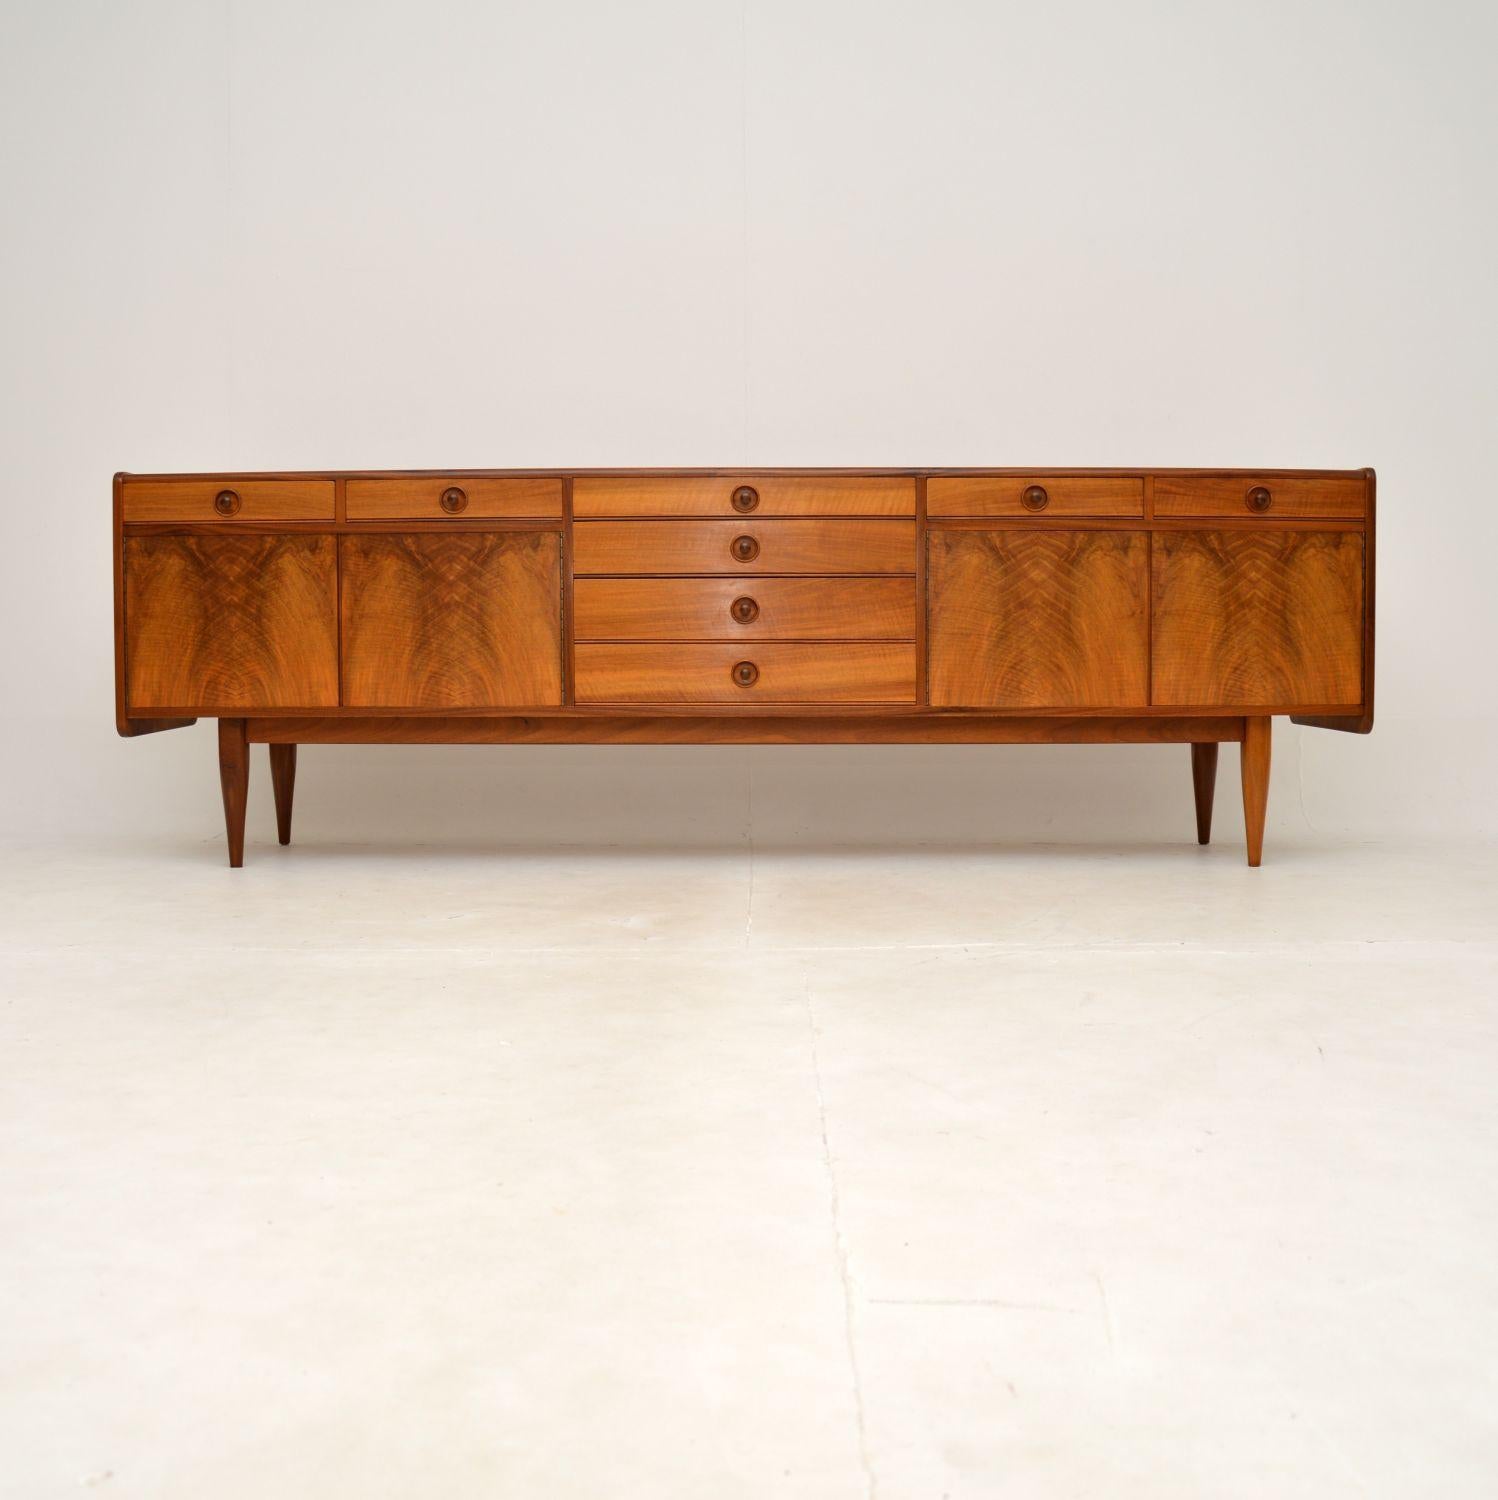 A magnificent vintage walnut sideboard designed by Robert Heritage. This was made in England, it dates from the 1960’s.

The quality of this is absolutely outstanding, it is extremely well made and beautifully designed. There are four doors and two